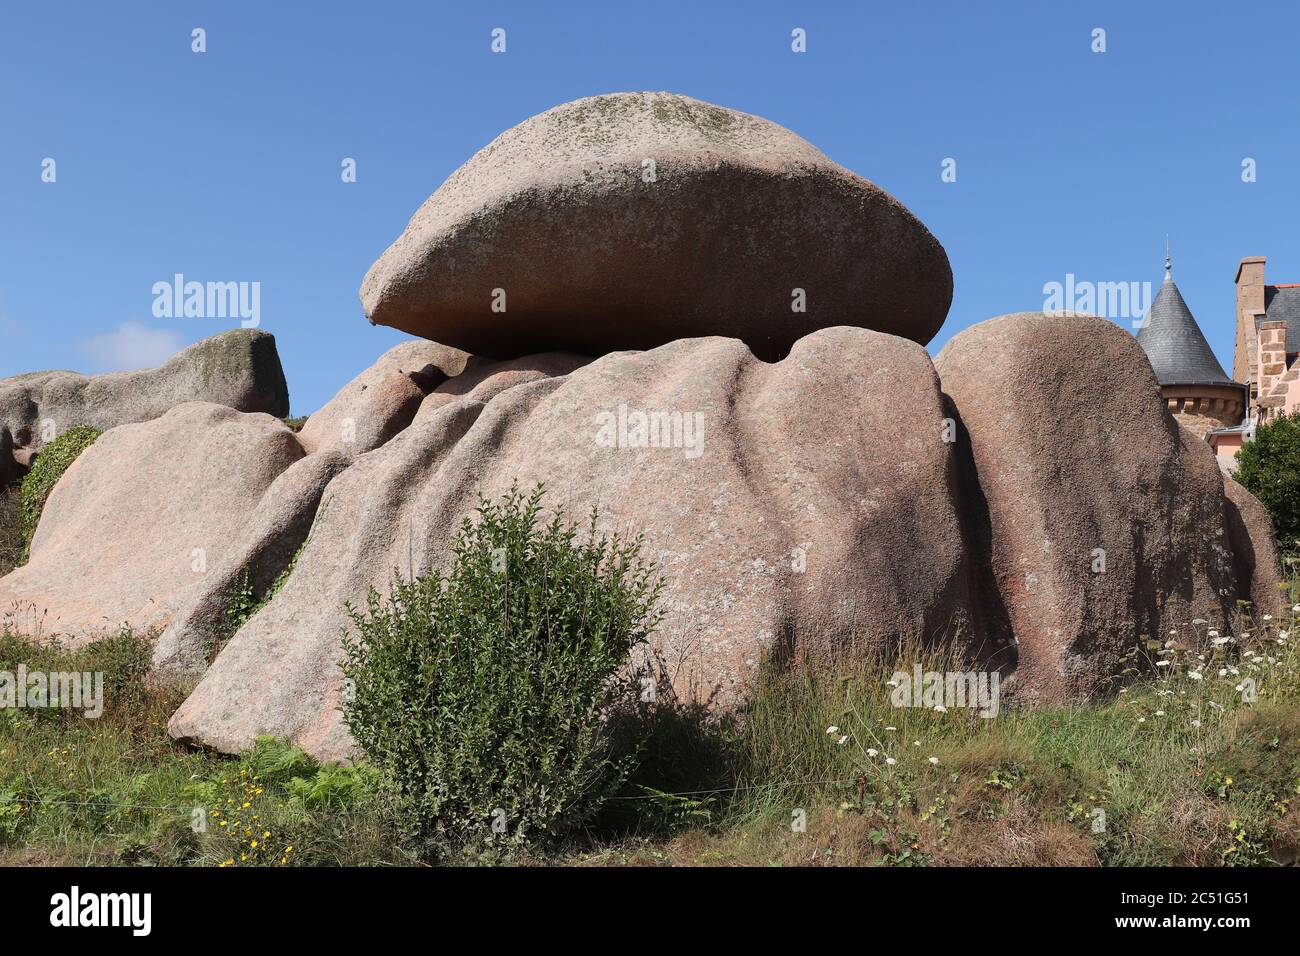 Boulders on the Cote de Granit Rose - Pink Granite Coast - great natural site of Ploumanach, Brittany, France Stock Photo